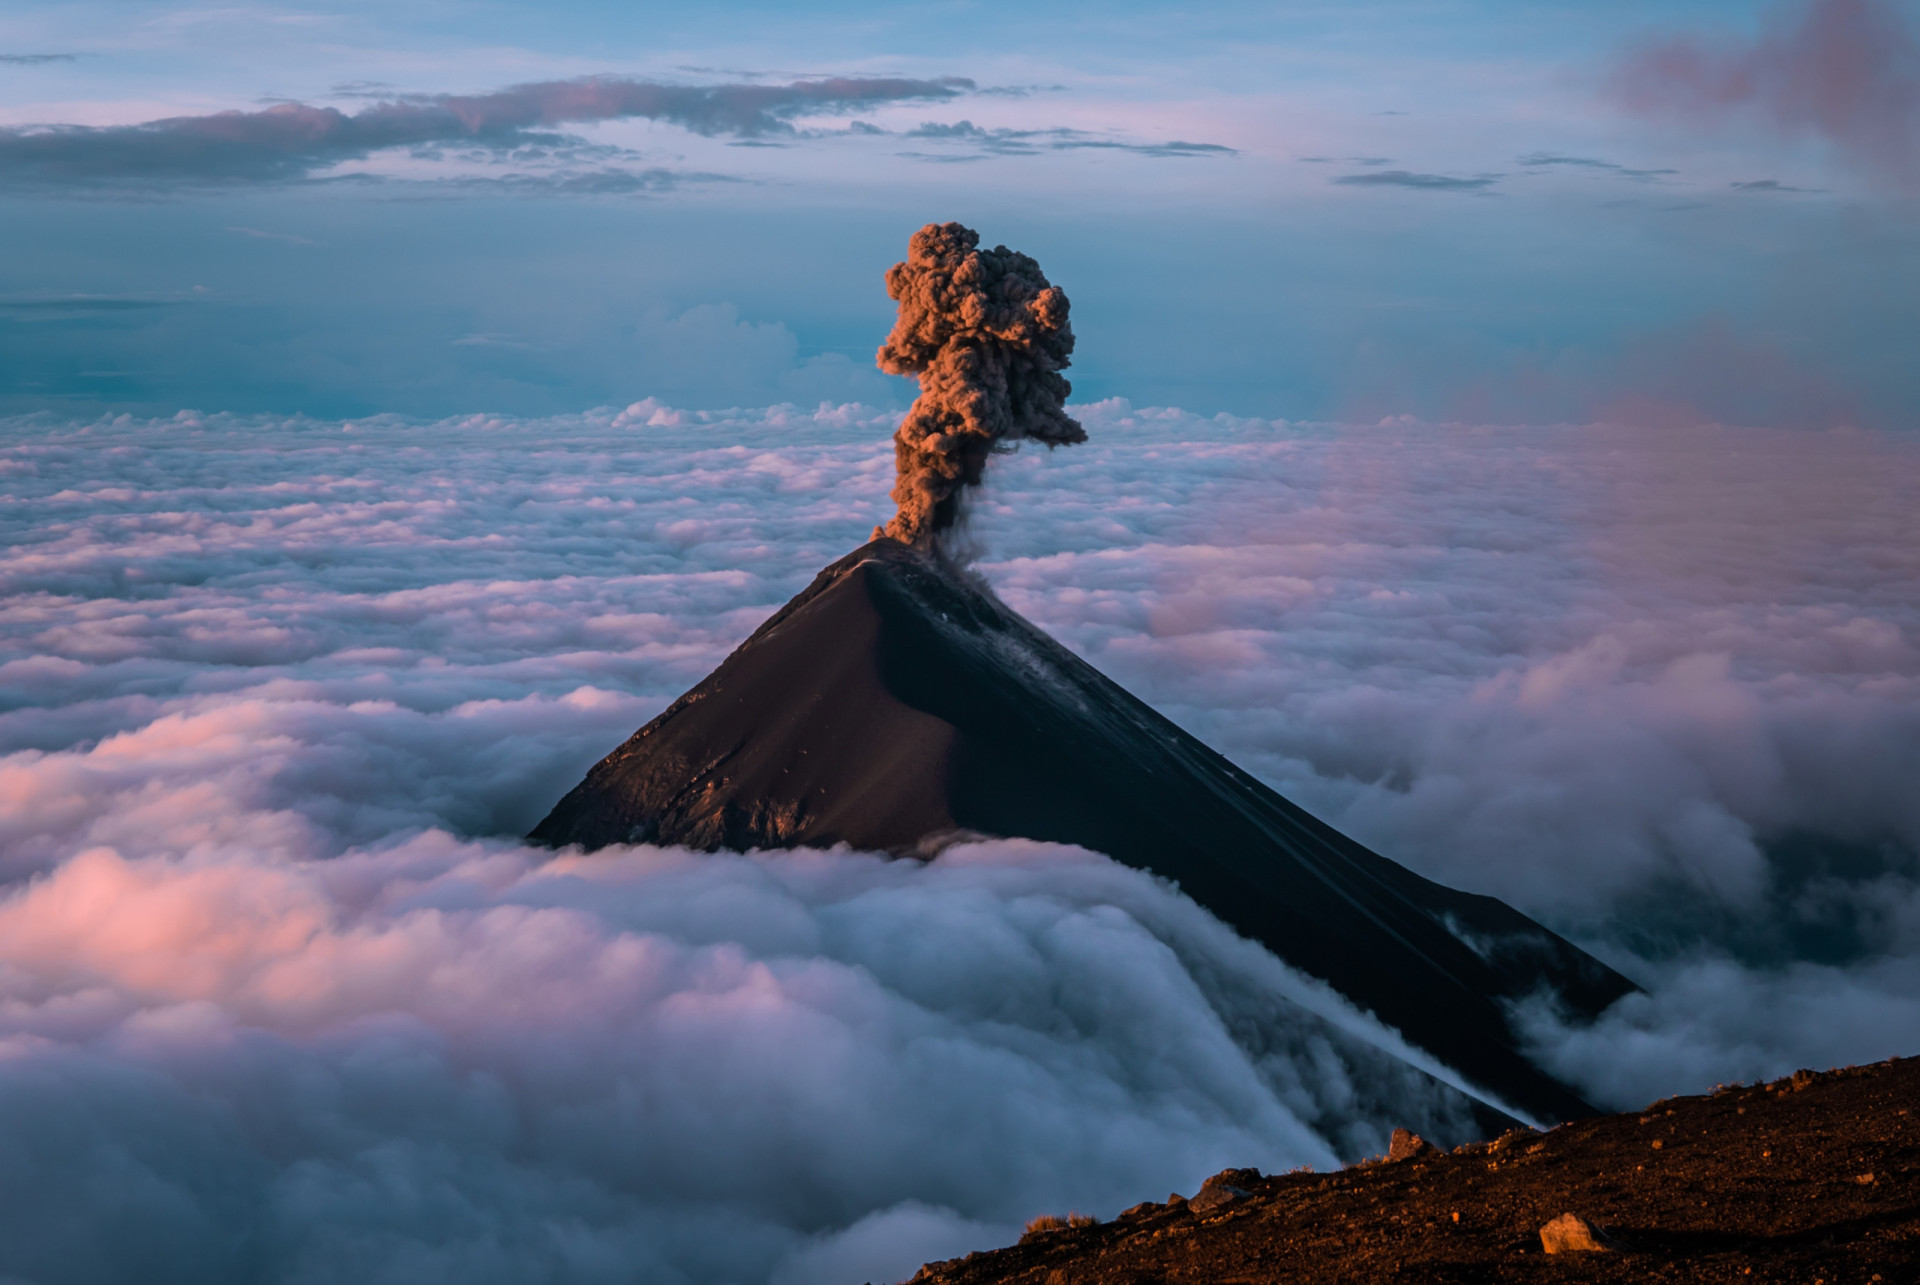 <p>Want to see an active volcano up close and personal? An epic hike takes you to the summit of Acatenango, at 13,044 ft (3,976 m) the third highest volcano in Central America. From here you can admire jaw-dropping views of the active Fuego volcano opposite.</p><p>You may also like:<a href="https://www.starsinsider.com/n/492409?utm_source=msn.com&utm_medium=display&utm_campaign=referral_description&utm_content=627756en-en"> Stars who regret famous movie roles</a></p>